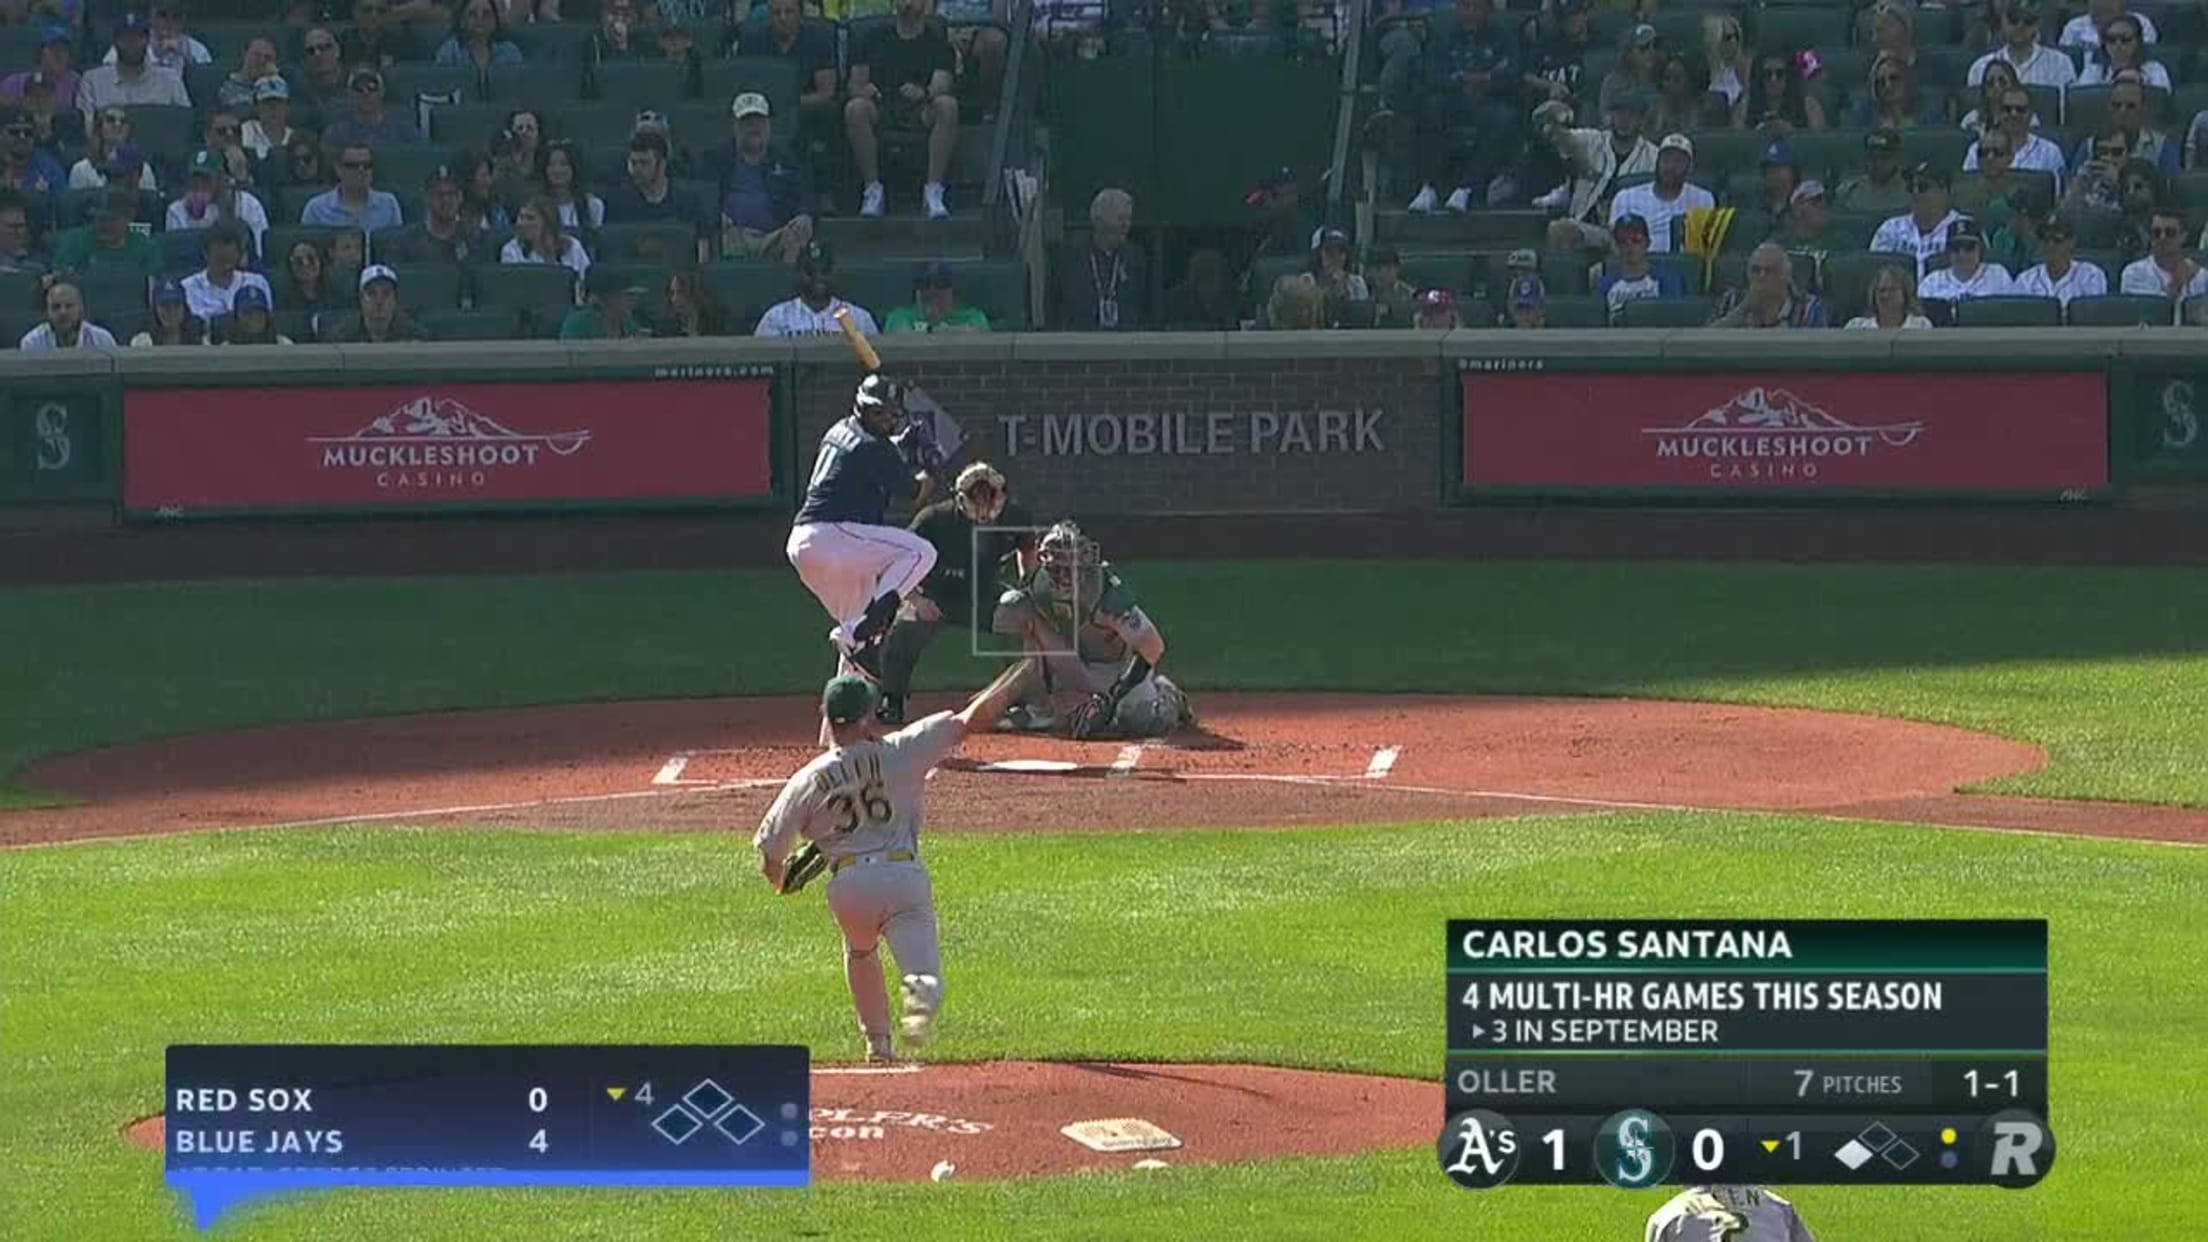 Even the Umpires Approve of Carlos Santana's Approach at the Plate